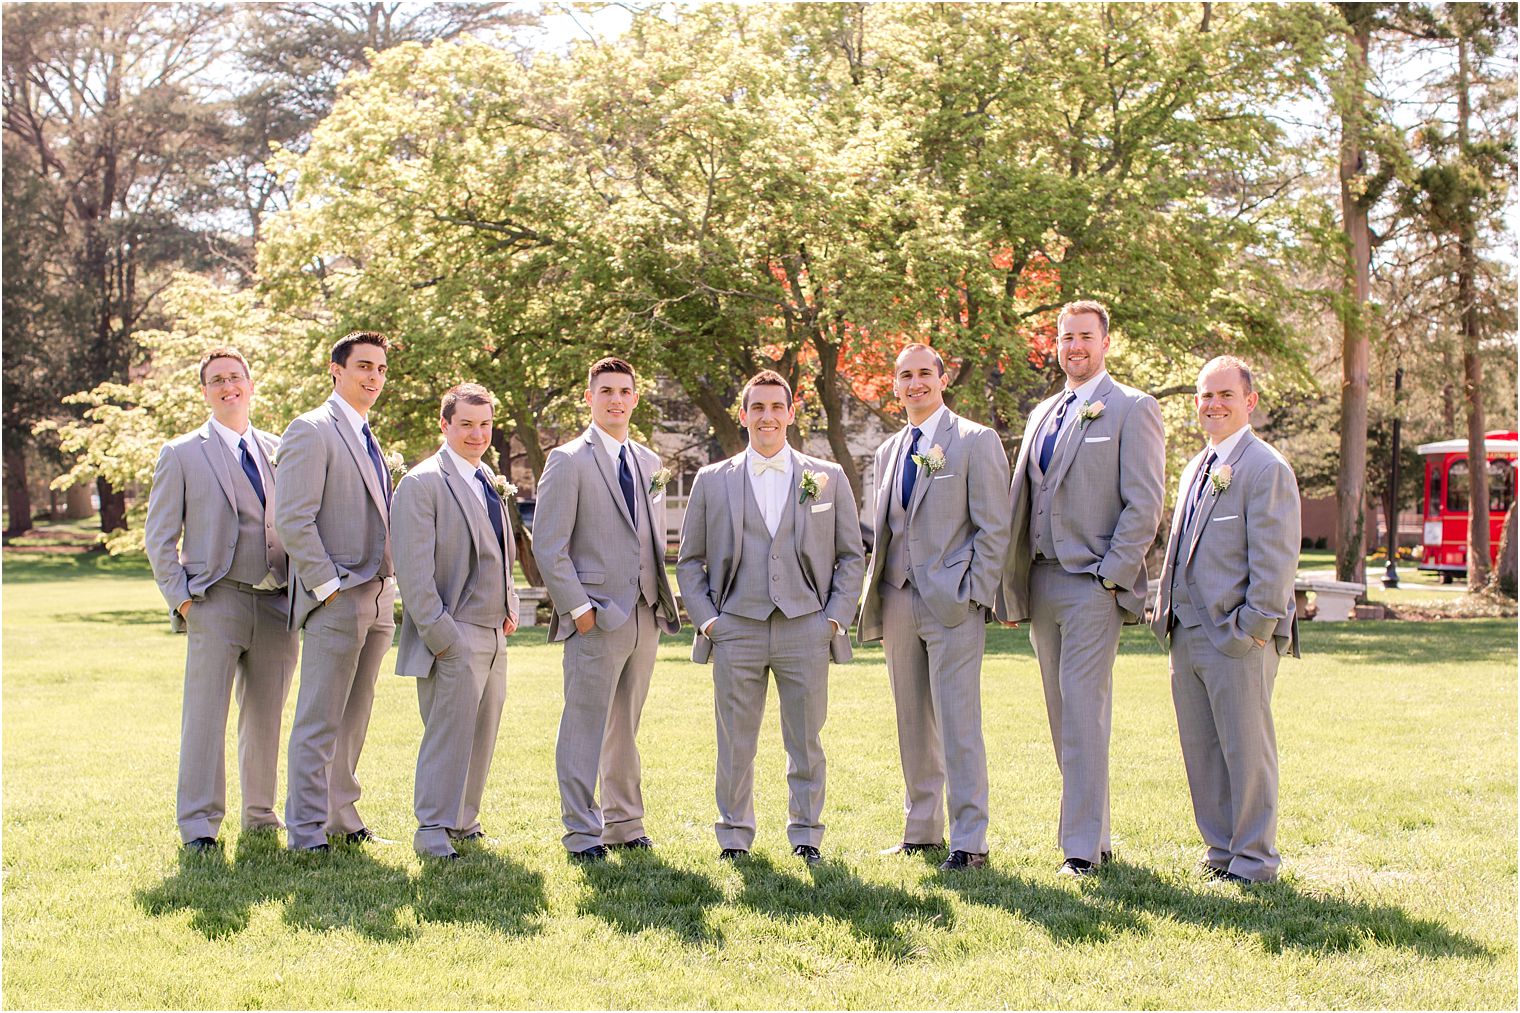 Gray and blue groomsmen suits